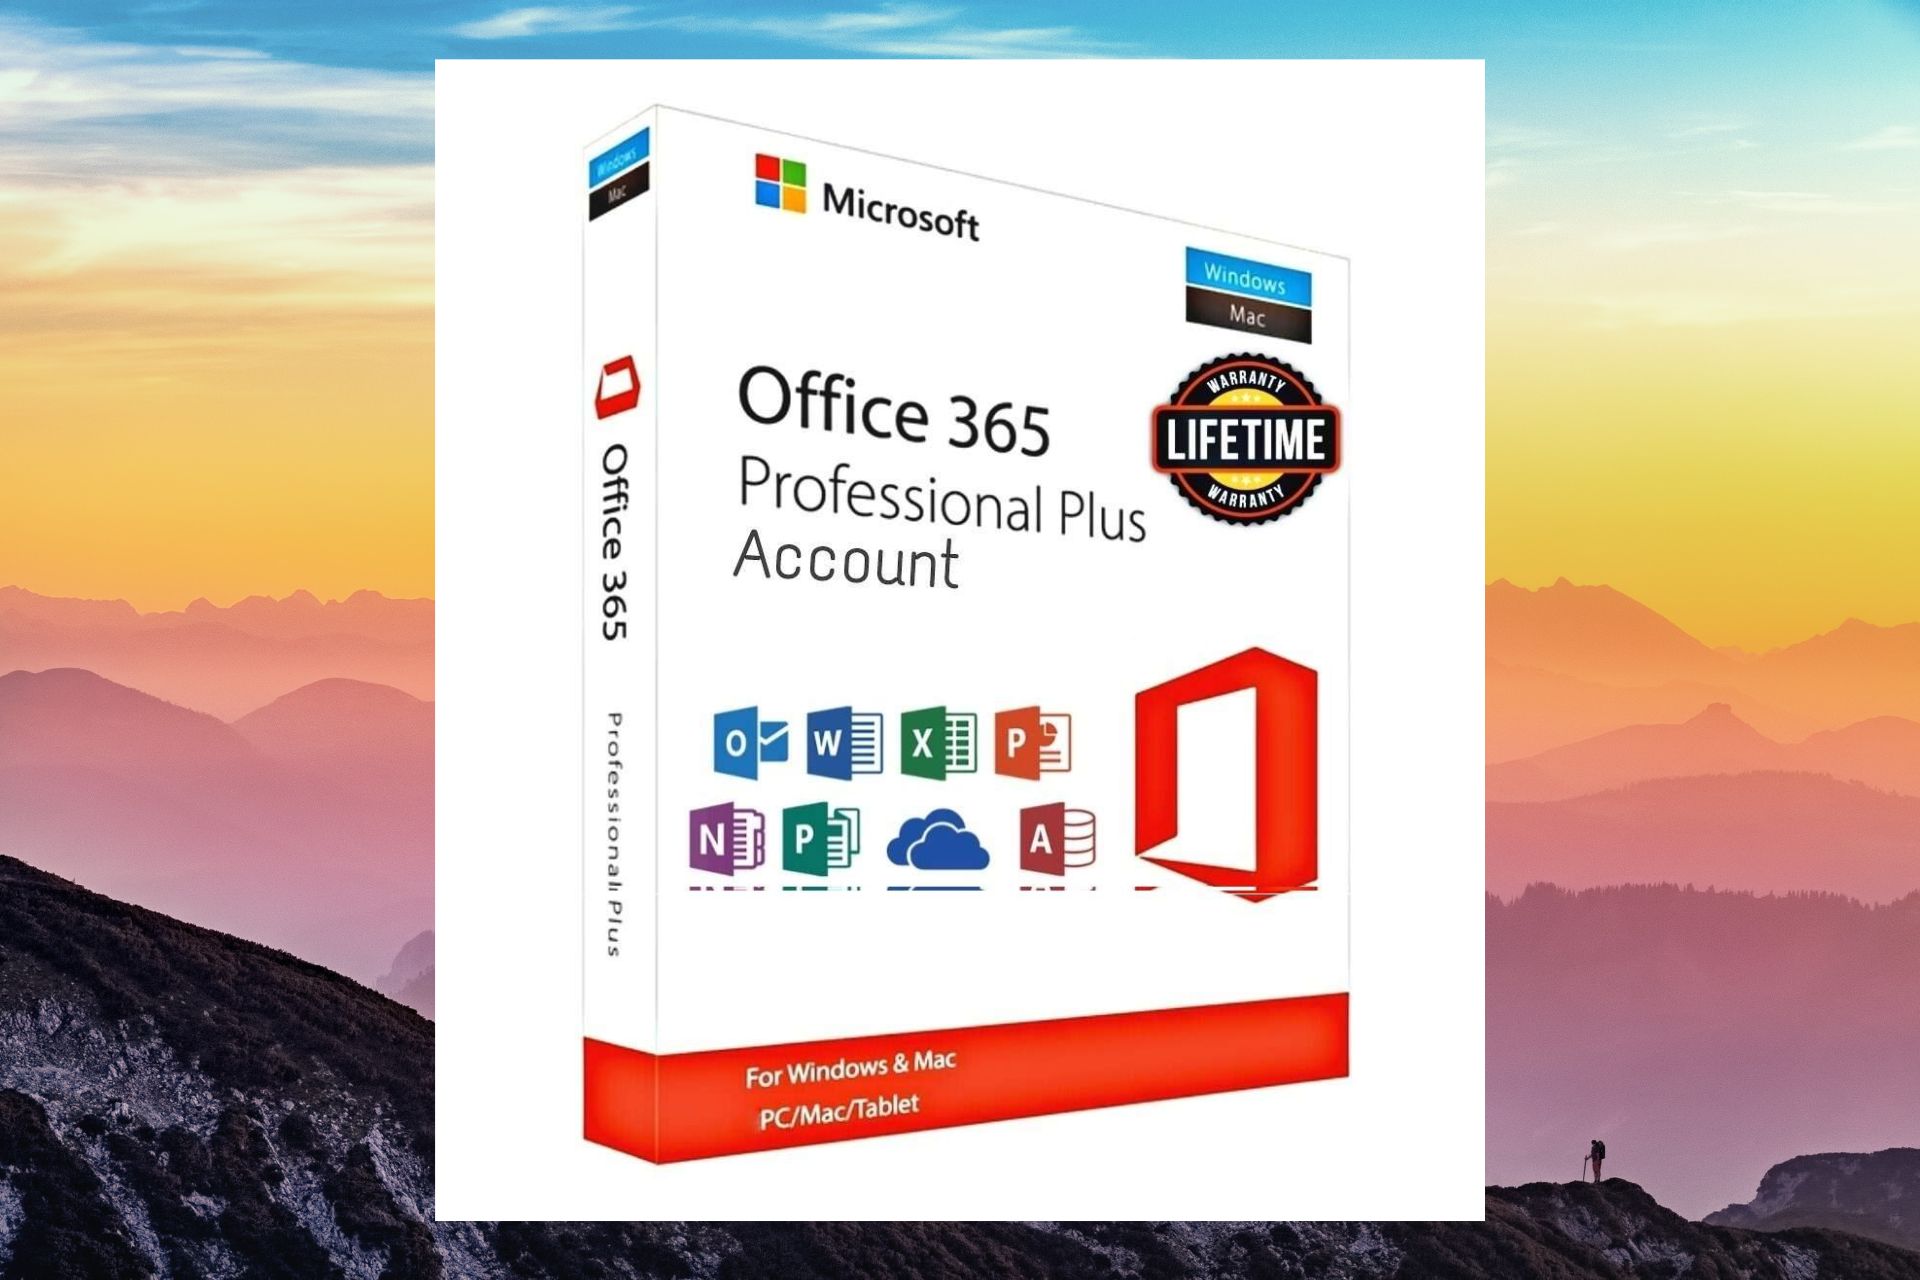 Get Office 365 Lifetime Subscription: How it Works